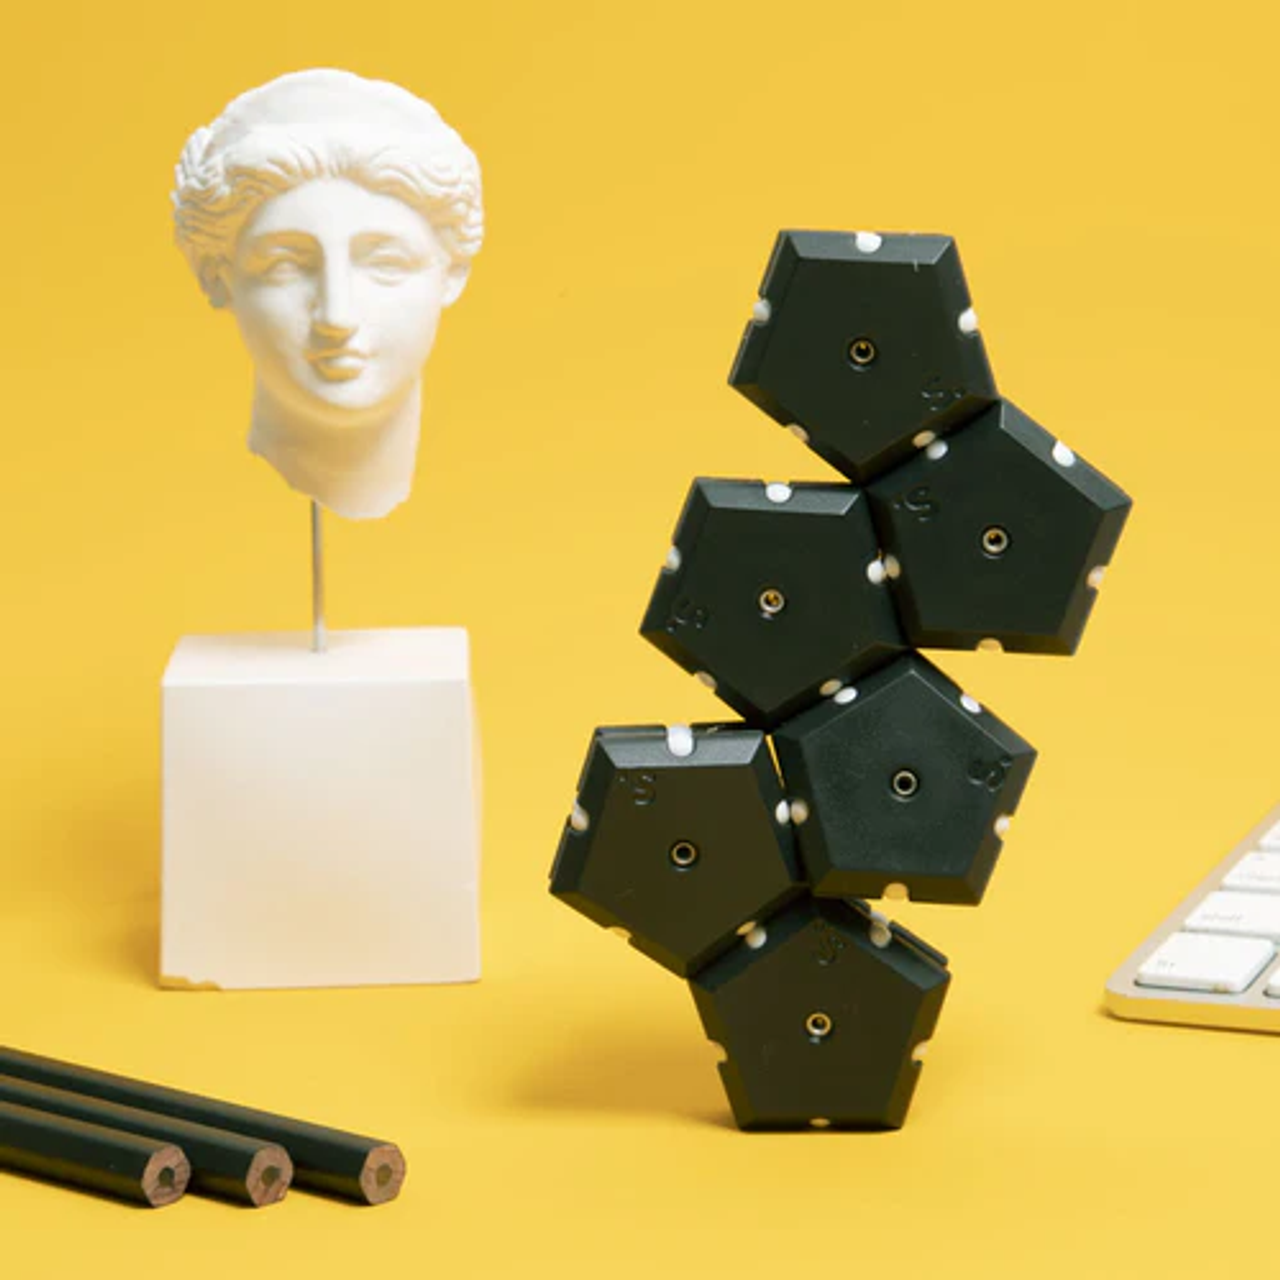 The Snake Eyes Geode Pop forms a small structure standing independently, next to three unsharpened pencils and a sculpture in the shape of a Roman head.